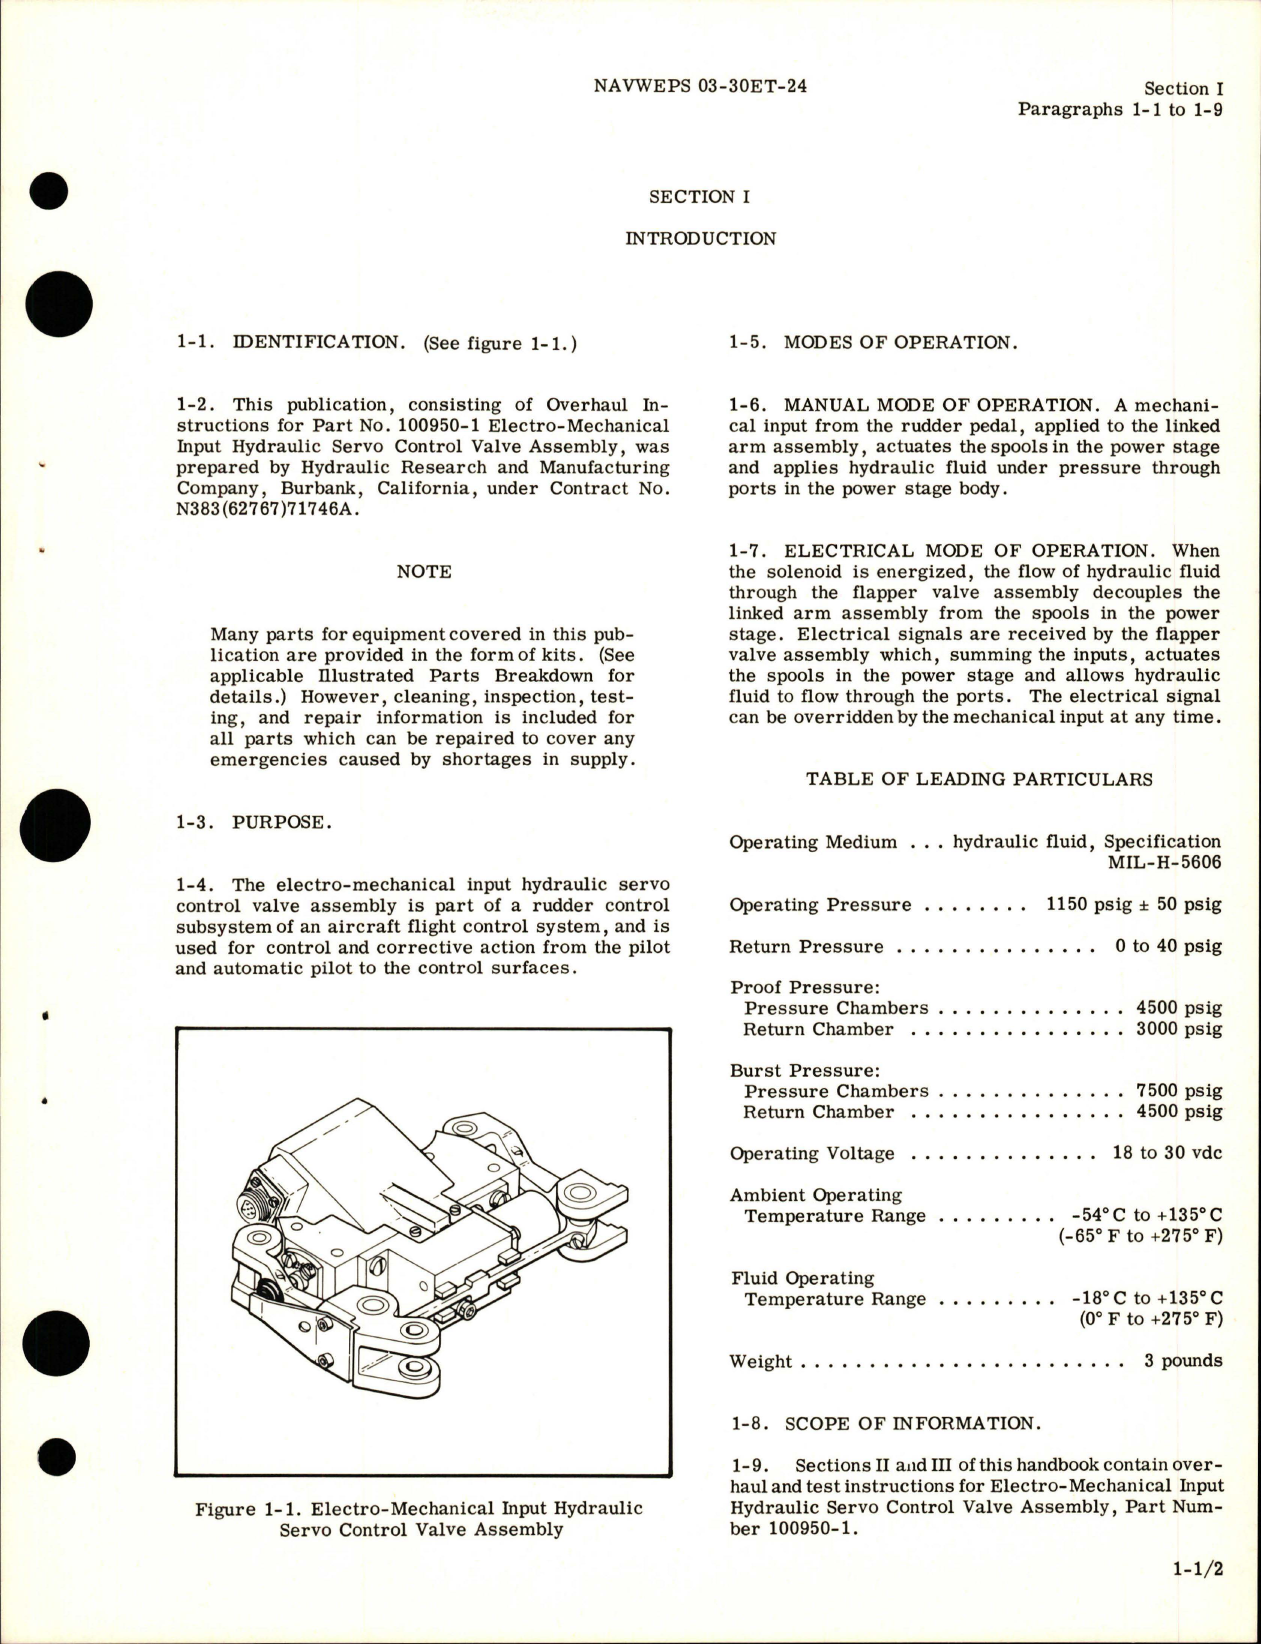 Sample page 5 from AirCorps Library document: Overhaul Instructions for Electro-Mechanical Input Hydraulic Servo Control Valve Assy - Part 100950-1